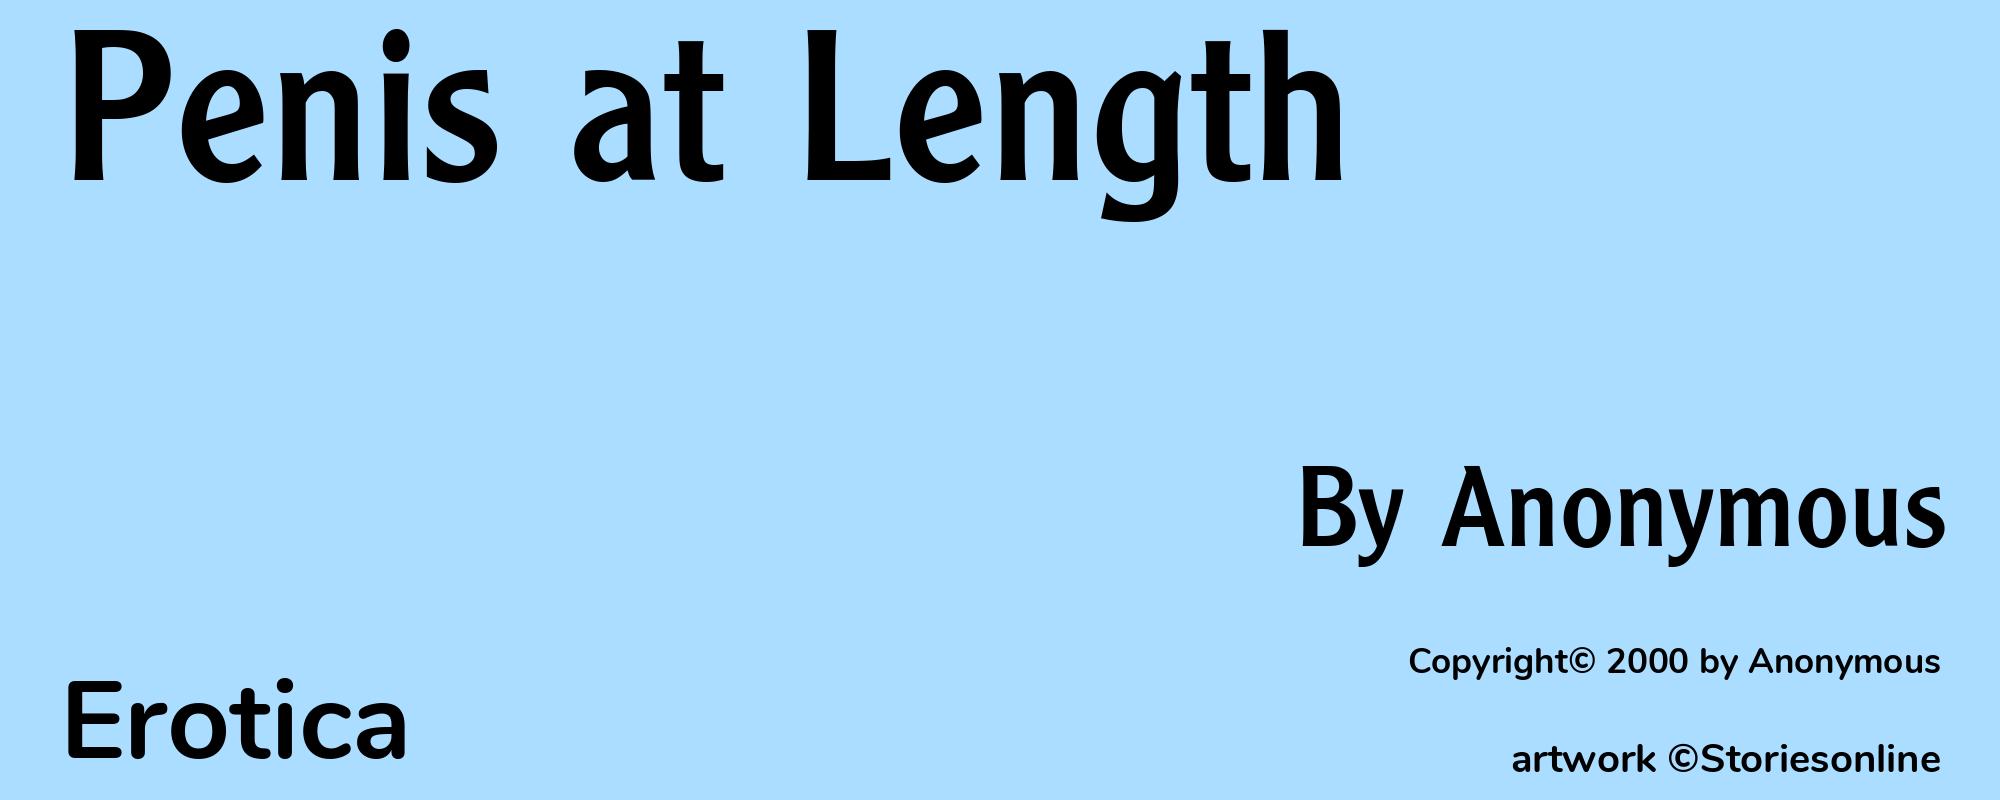 Penis at Length - Cover